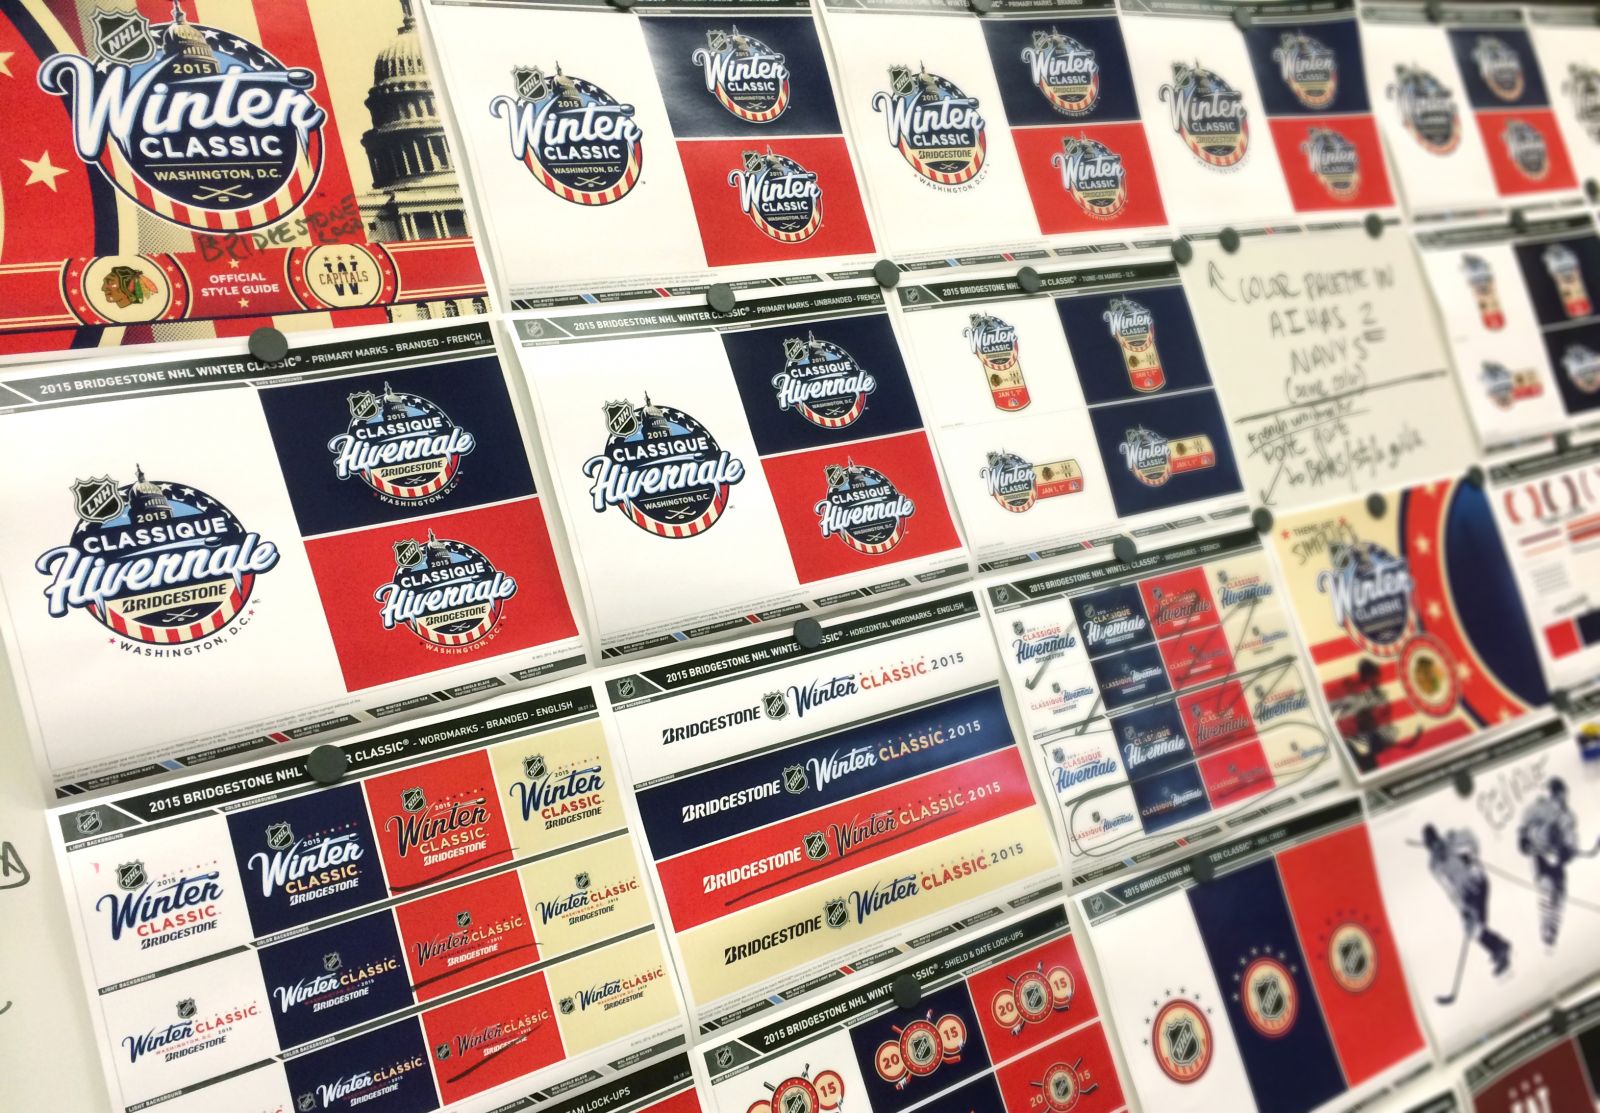 nhl winter classic style guide wall